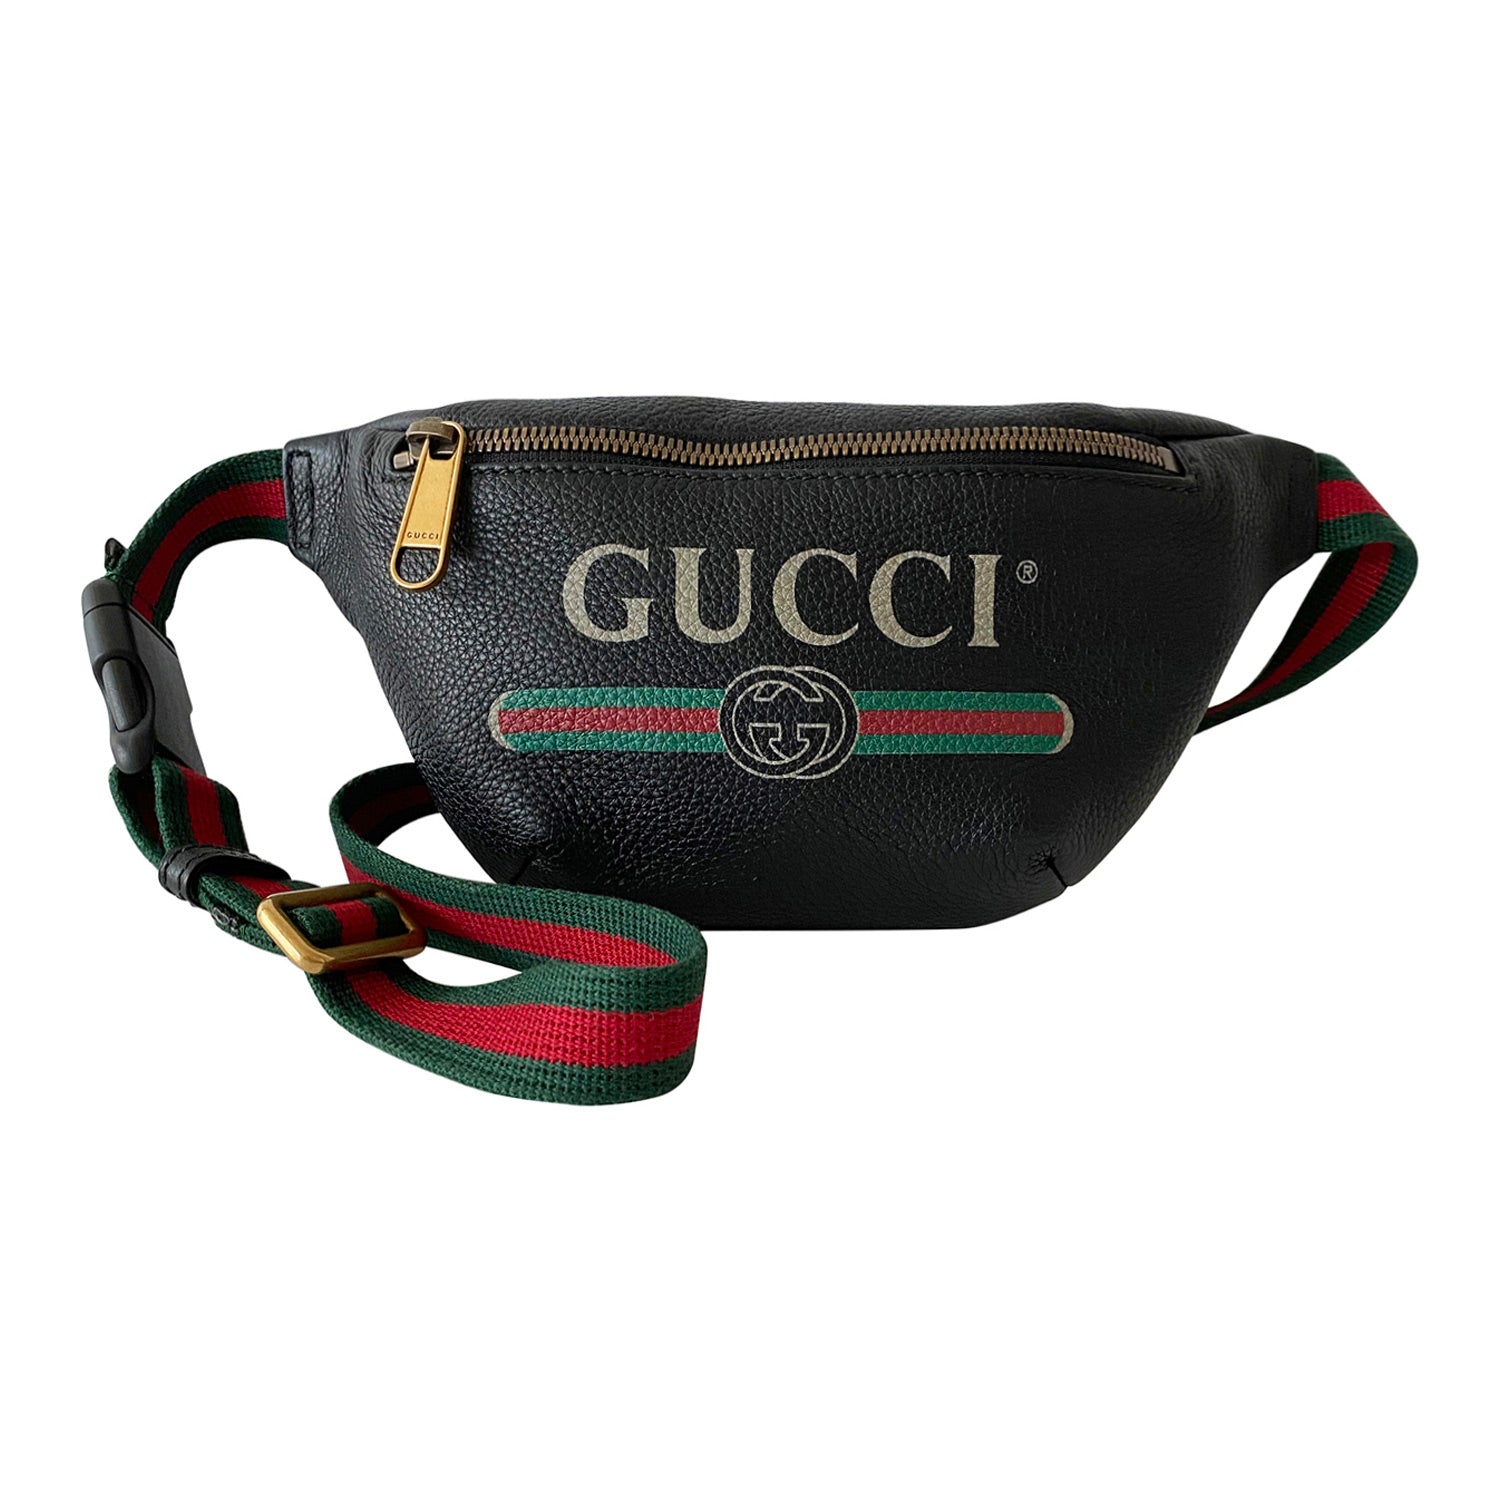 Gucci - Small Print Belt Bag - Belmont Luxe